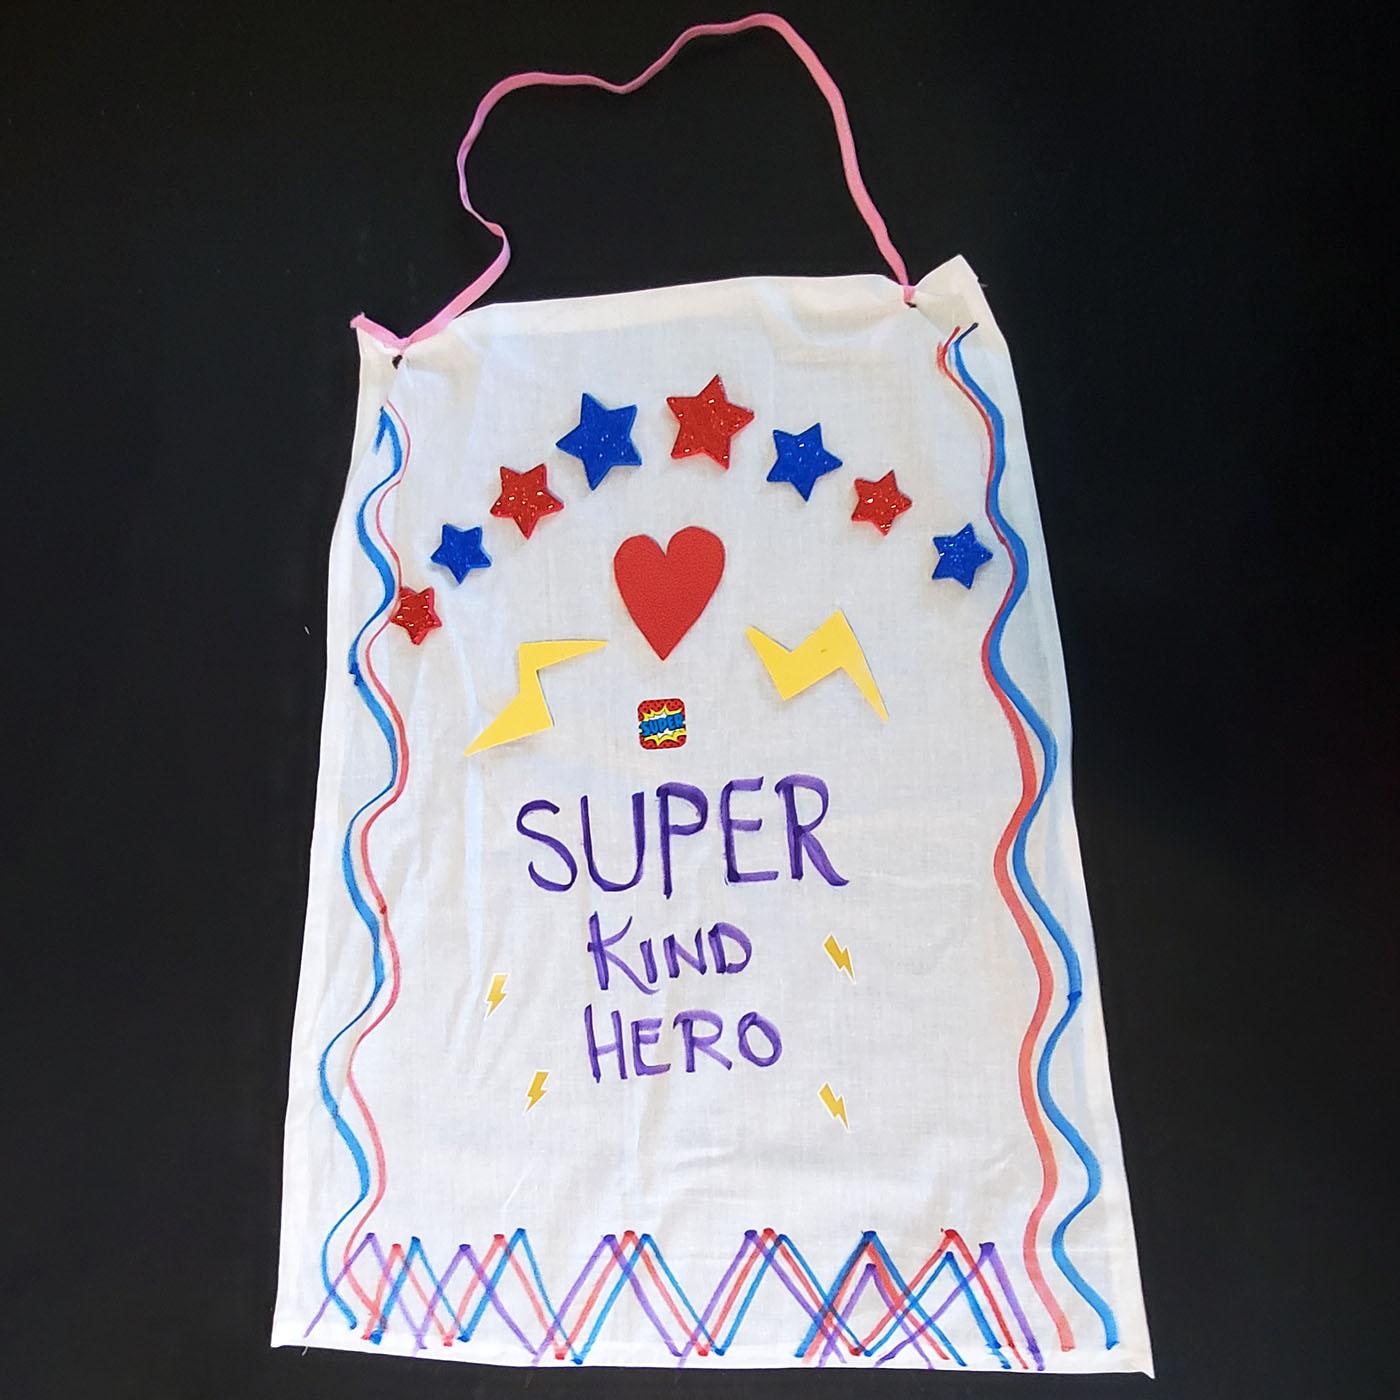 A cape made out of fabric with star decorations and text reading 'Super Kind Hero'